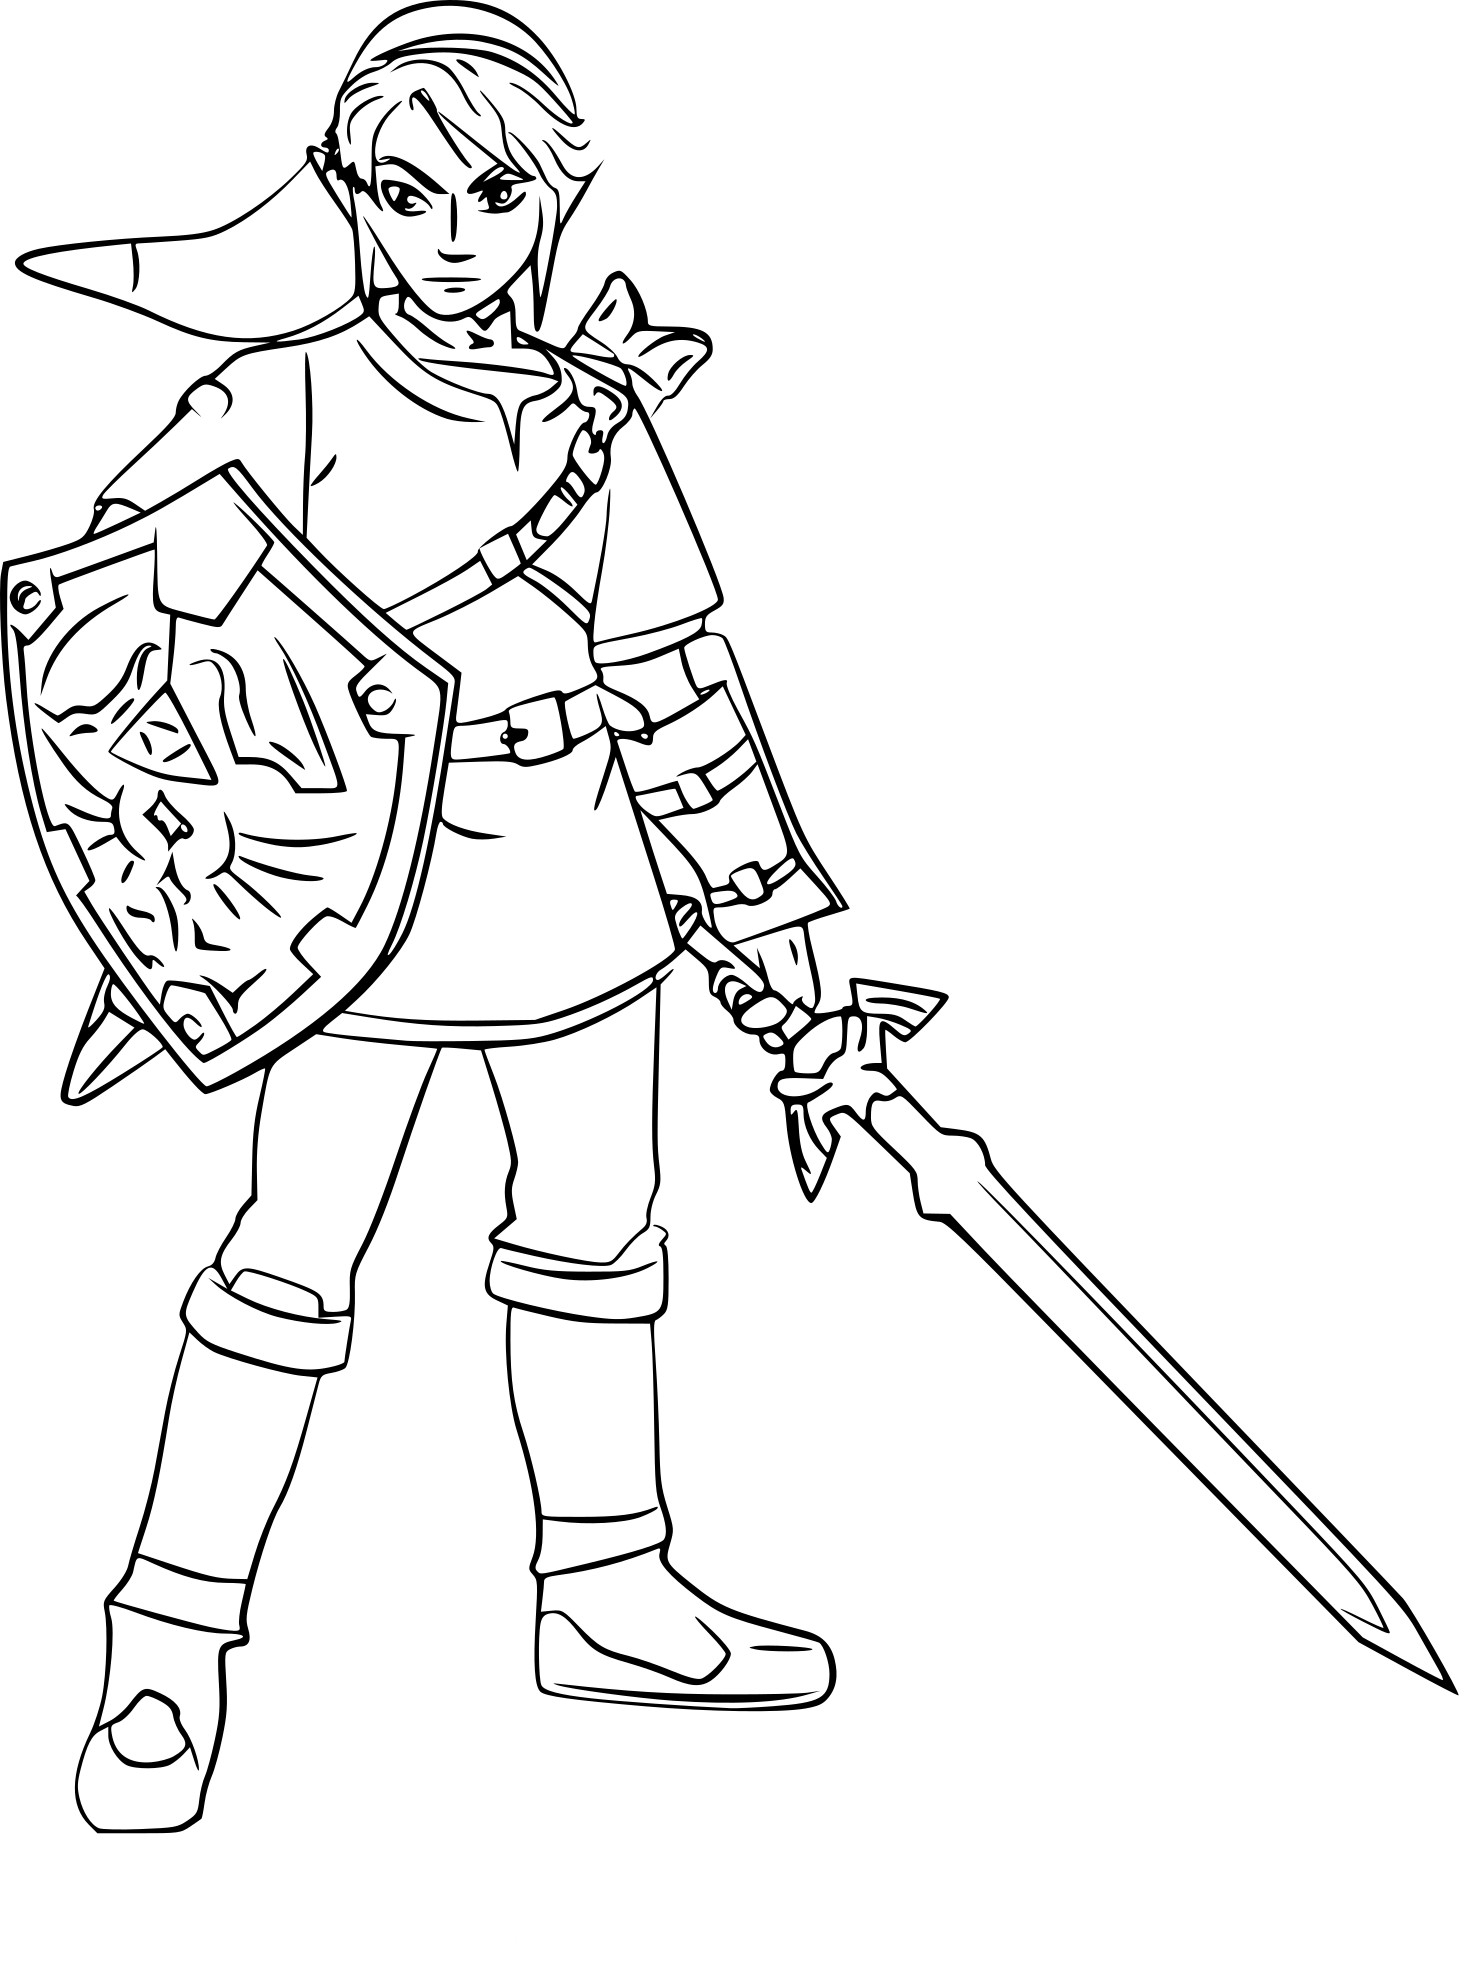 Legend Of Zelda Coloring Pages at Free printable